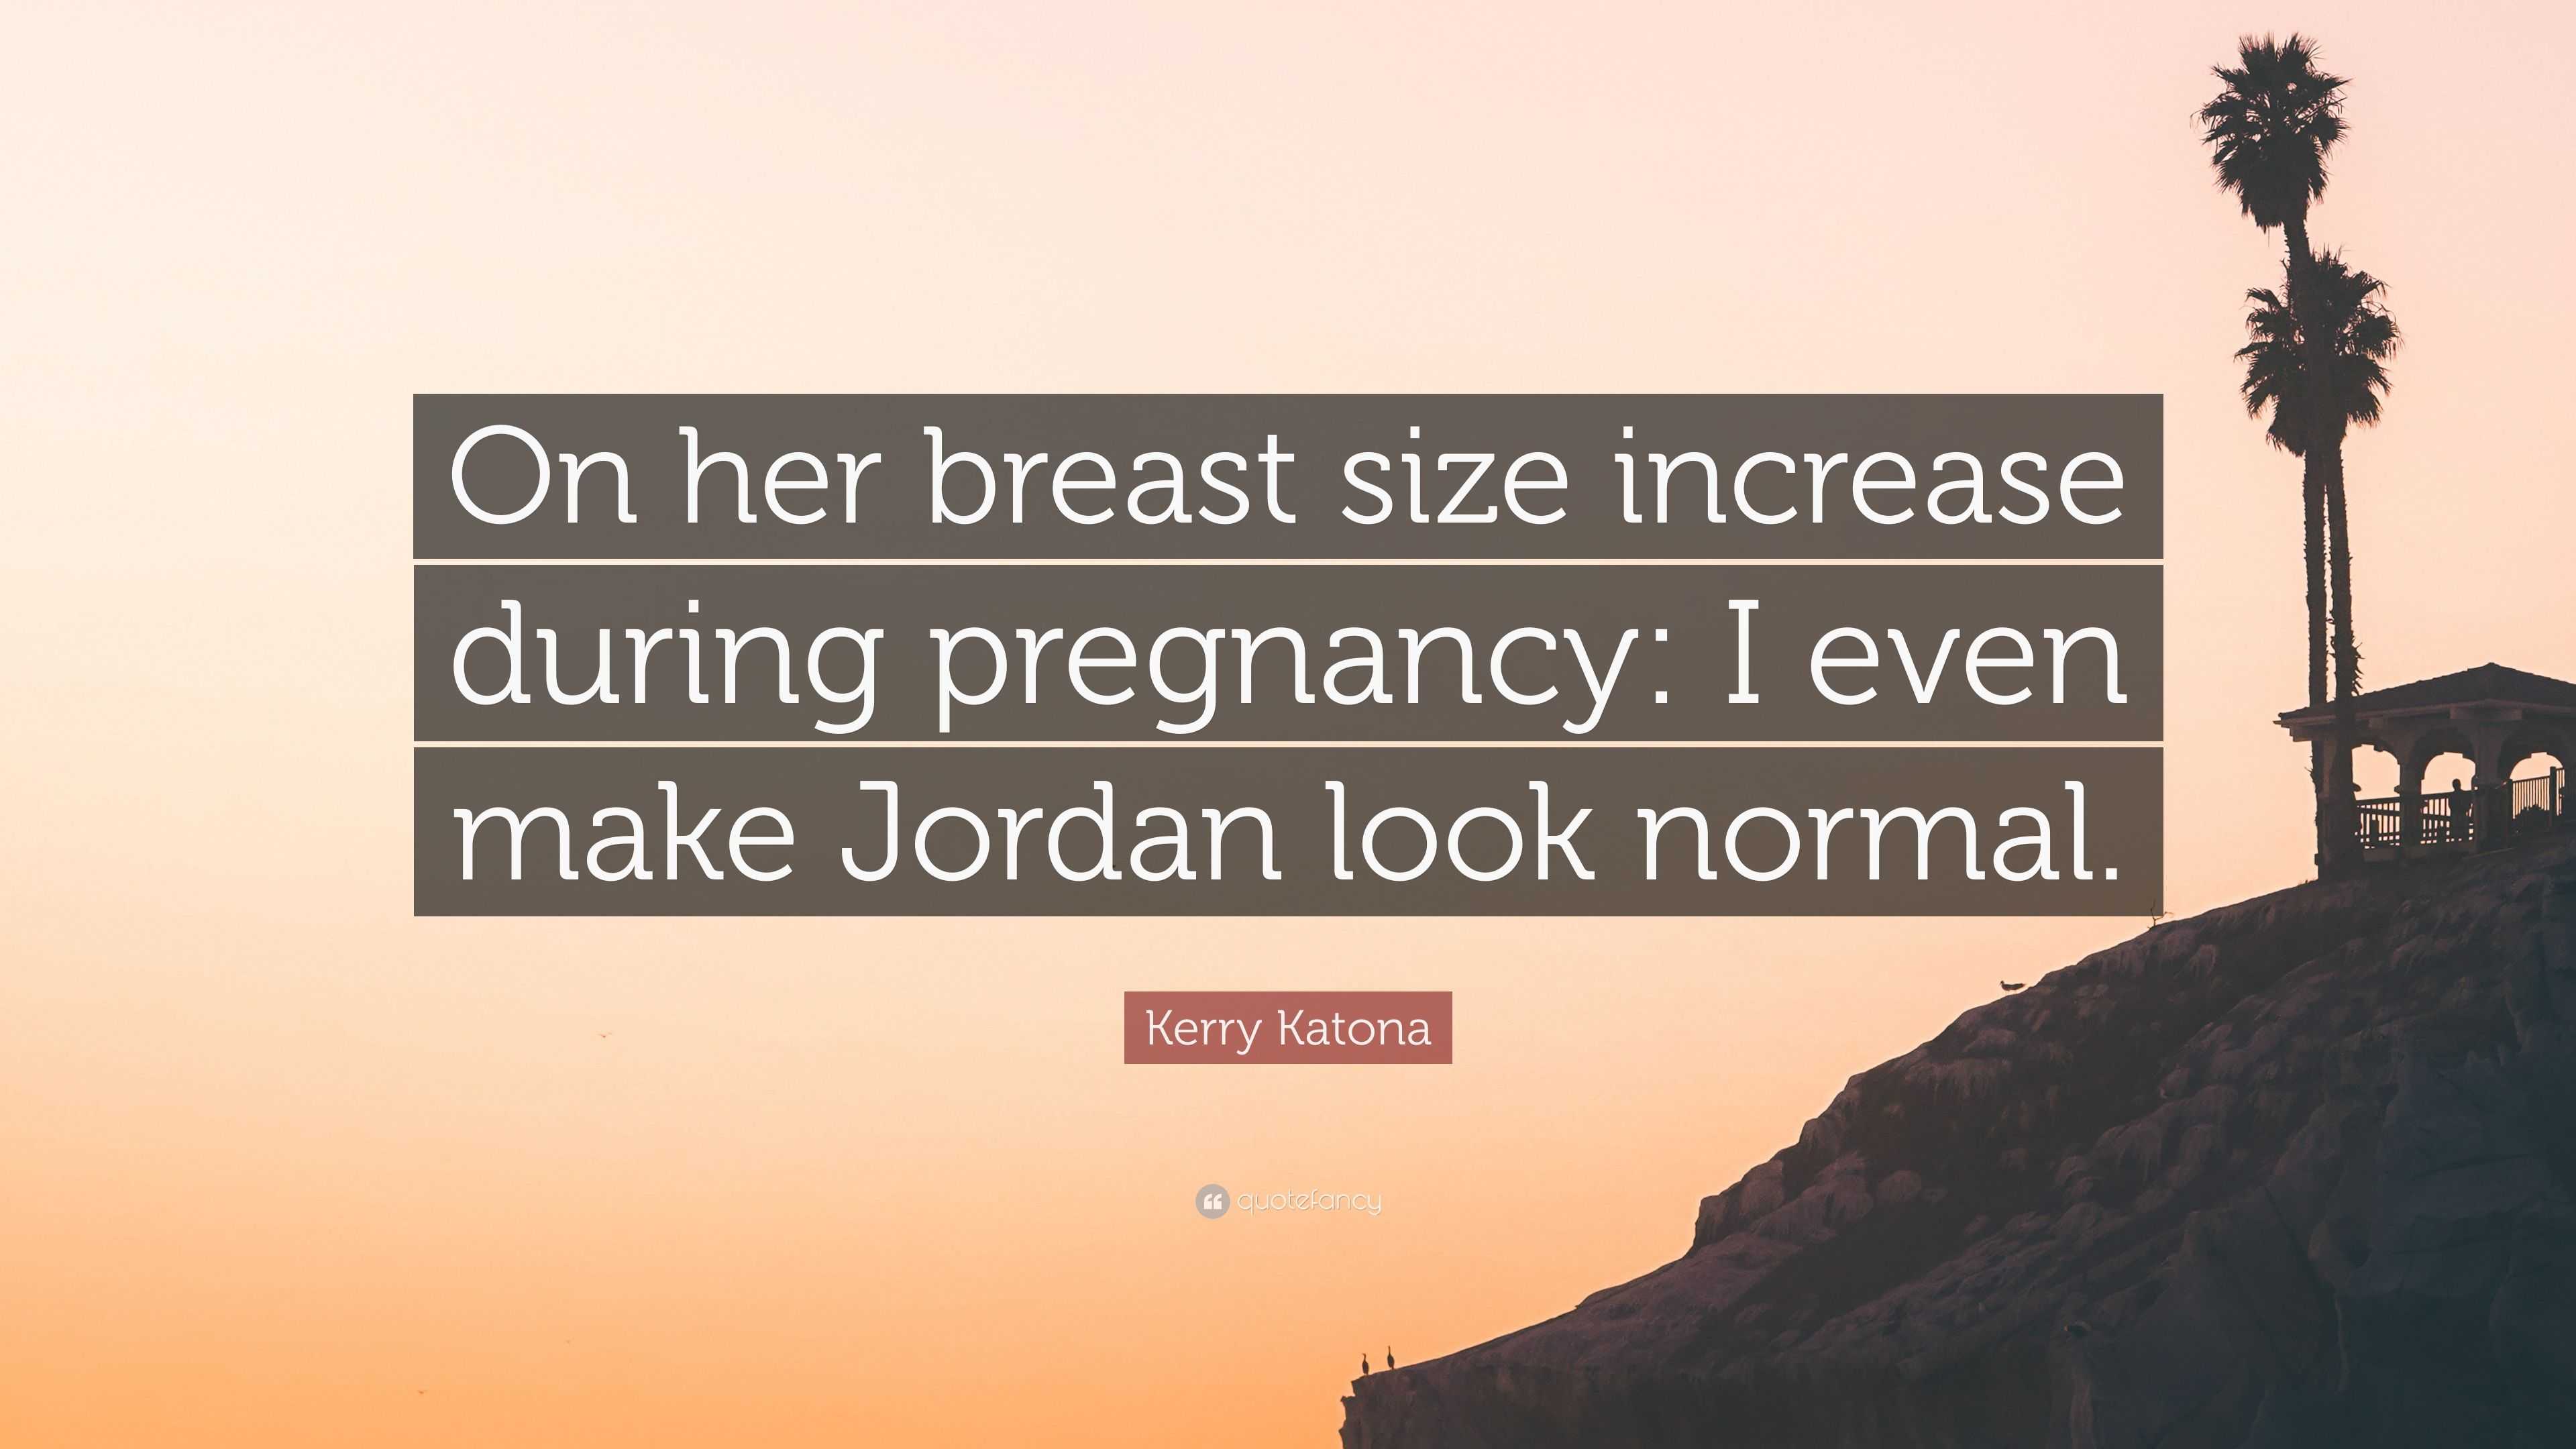 https://quotefancy.com/media/wallpaper/3840x2160/6058673-Kerry-Katona-Quote-On-her-breast-size-increase-during-pregnancy-I.jpg